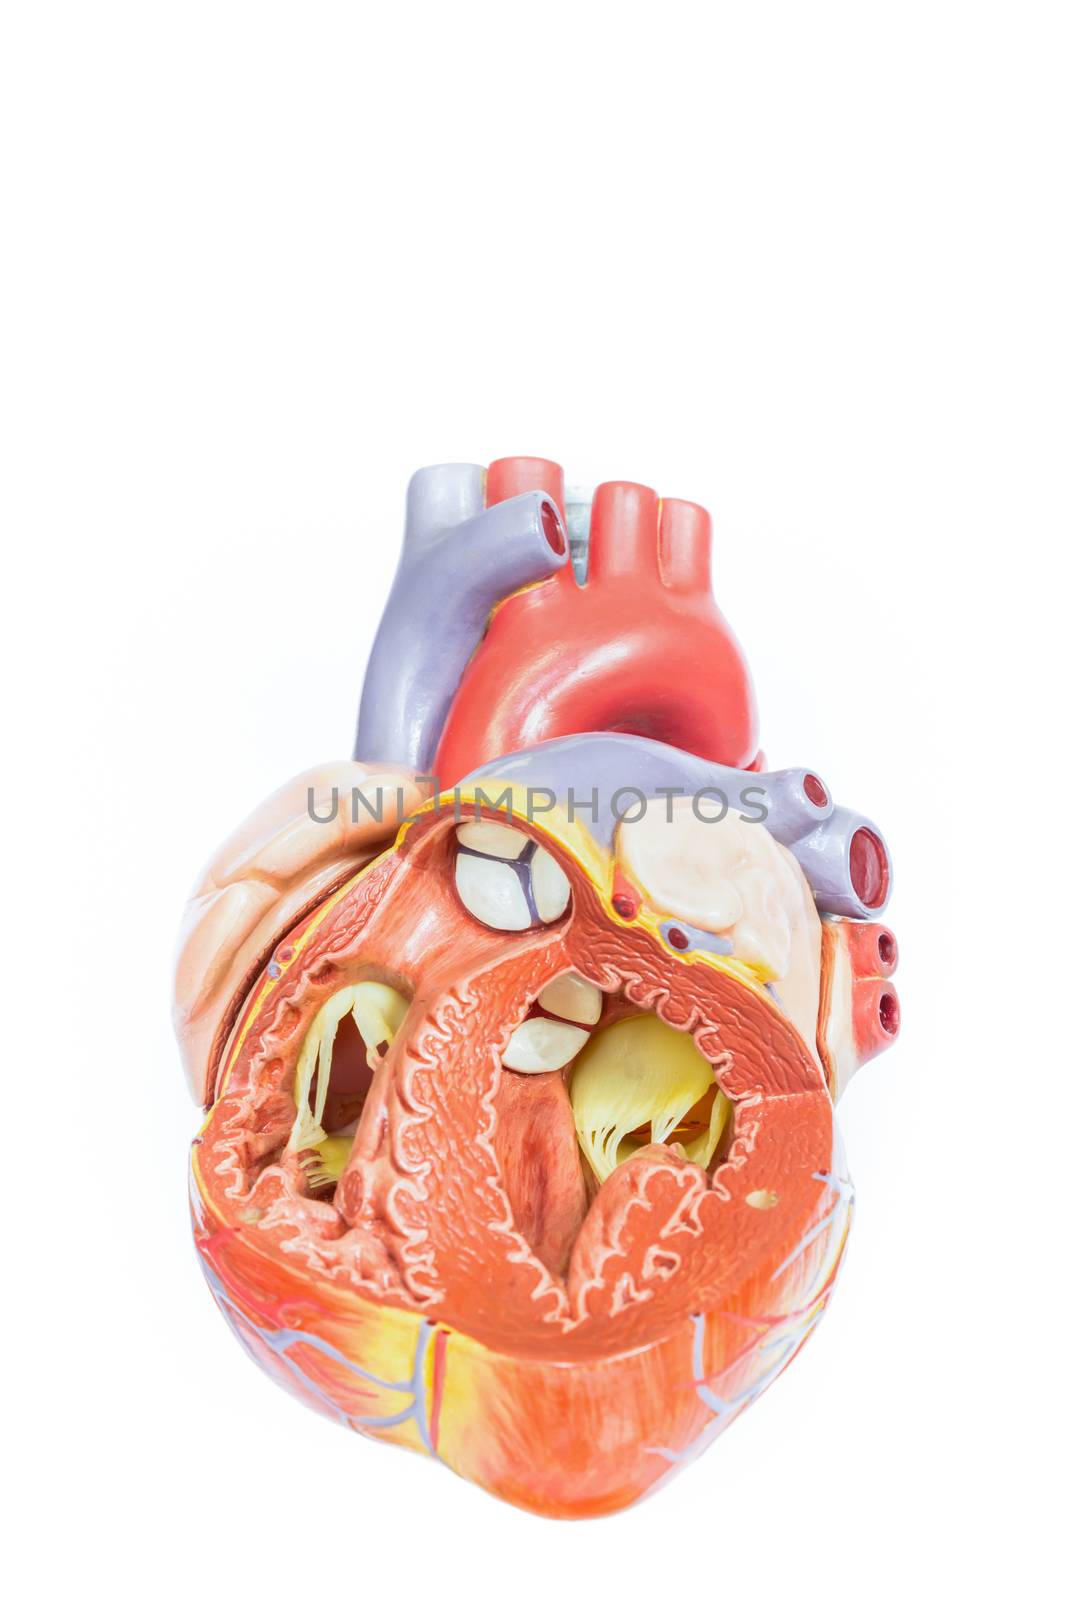 Open artificial human heart model front view isolated on white background